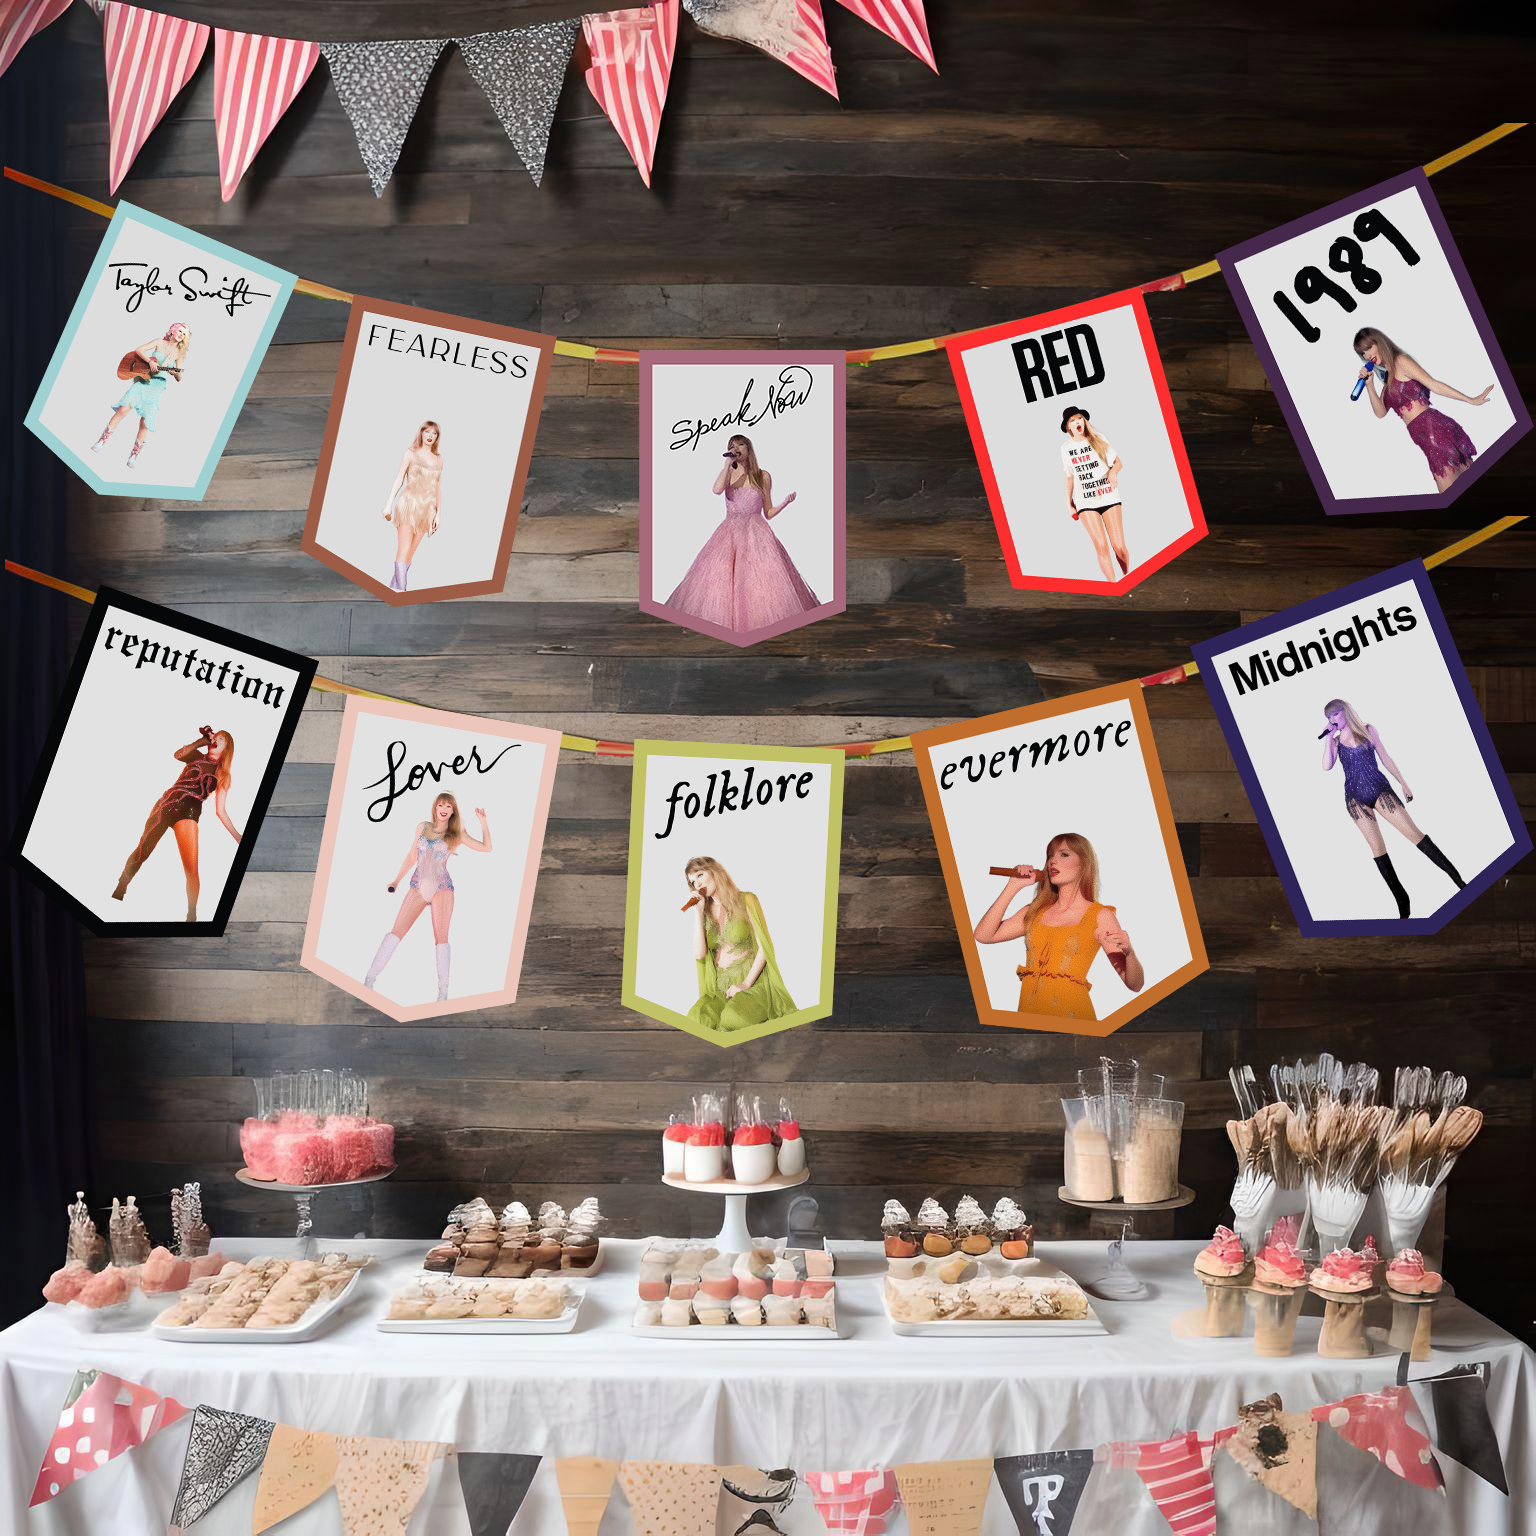 Oriental Trading on Instagram: The cutest Taylor Swift themed party favors!  #taylorswift #taylorswiftparty #partyideas